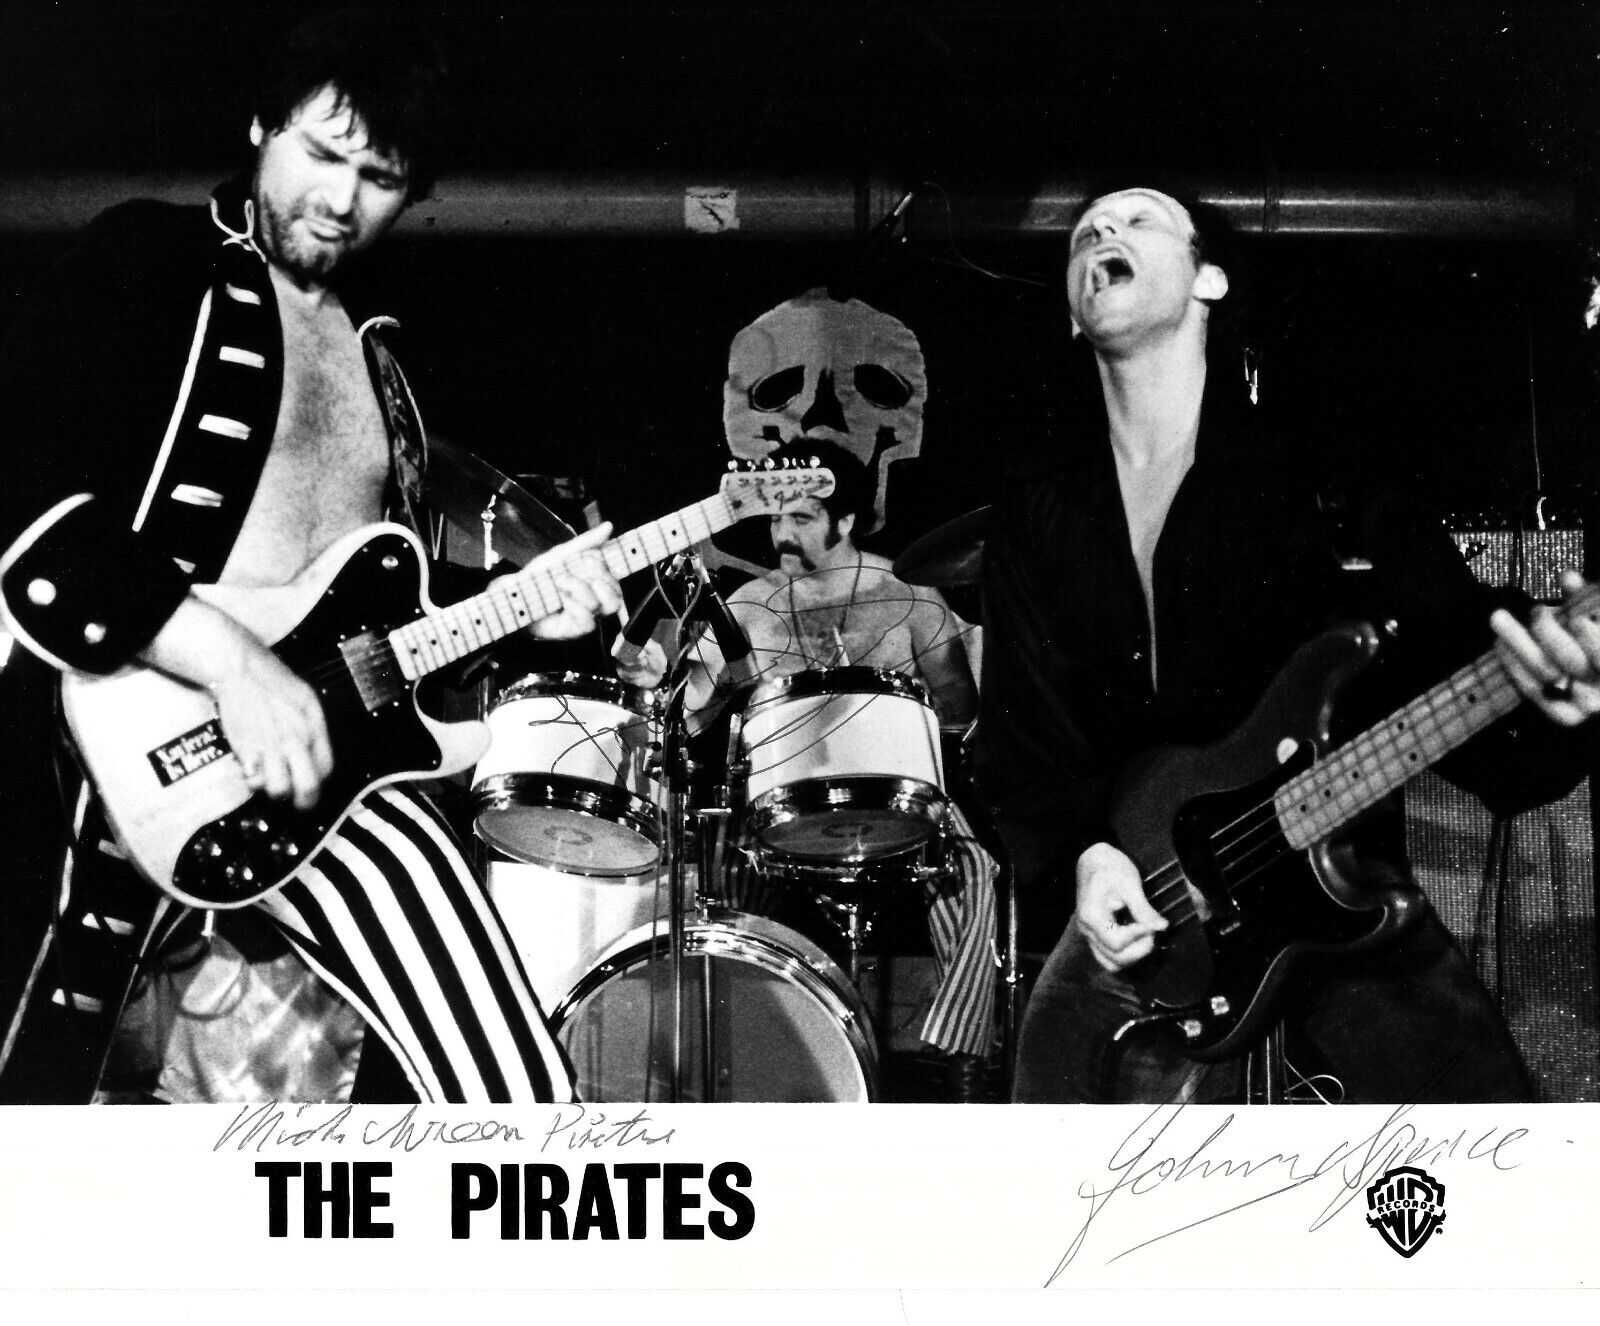 THE PIRATES SIGNED 8x10 Photo Poster painting MICK GREEN UACC & AFTAL RD AUTOGRAPH JOHNNY KIDD